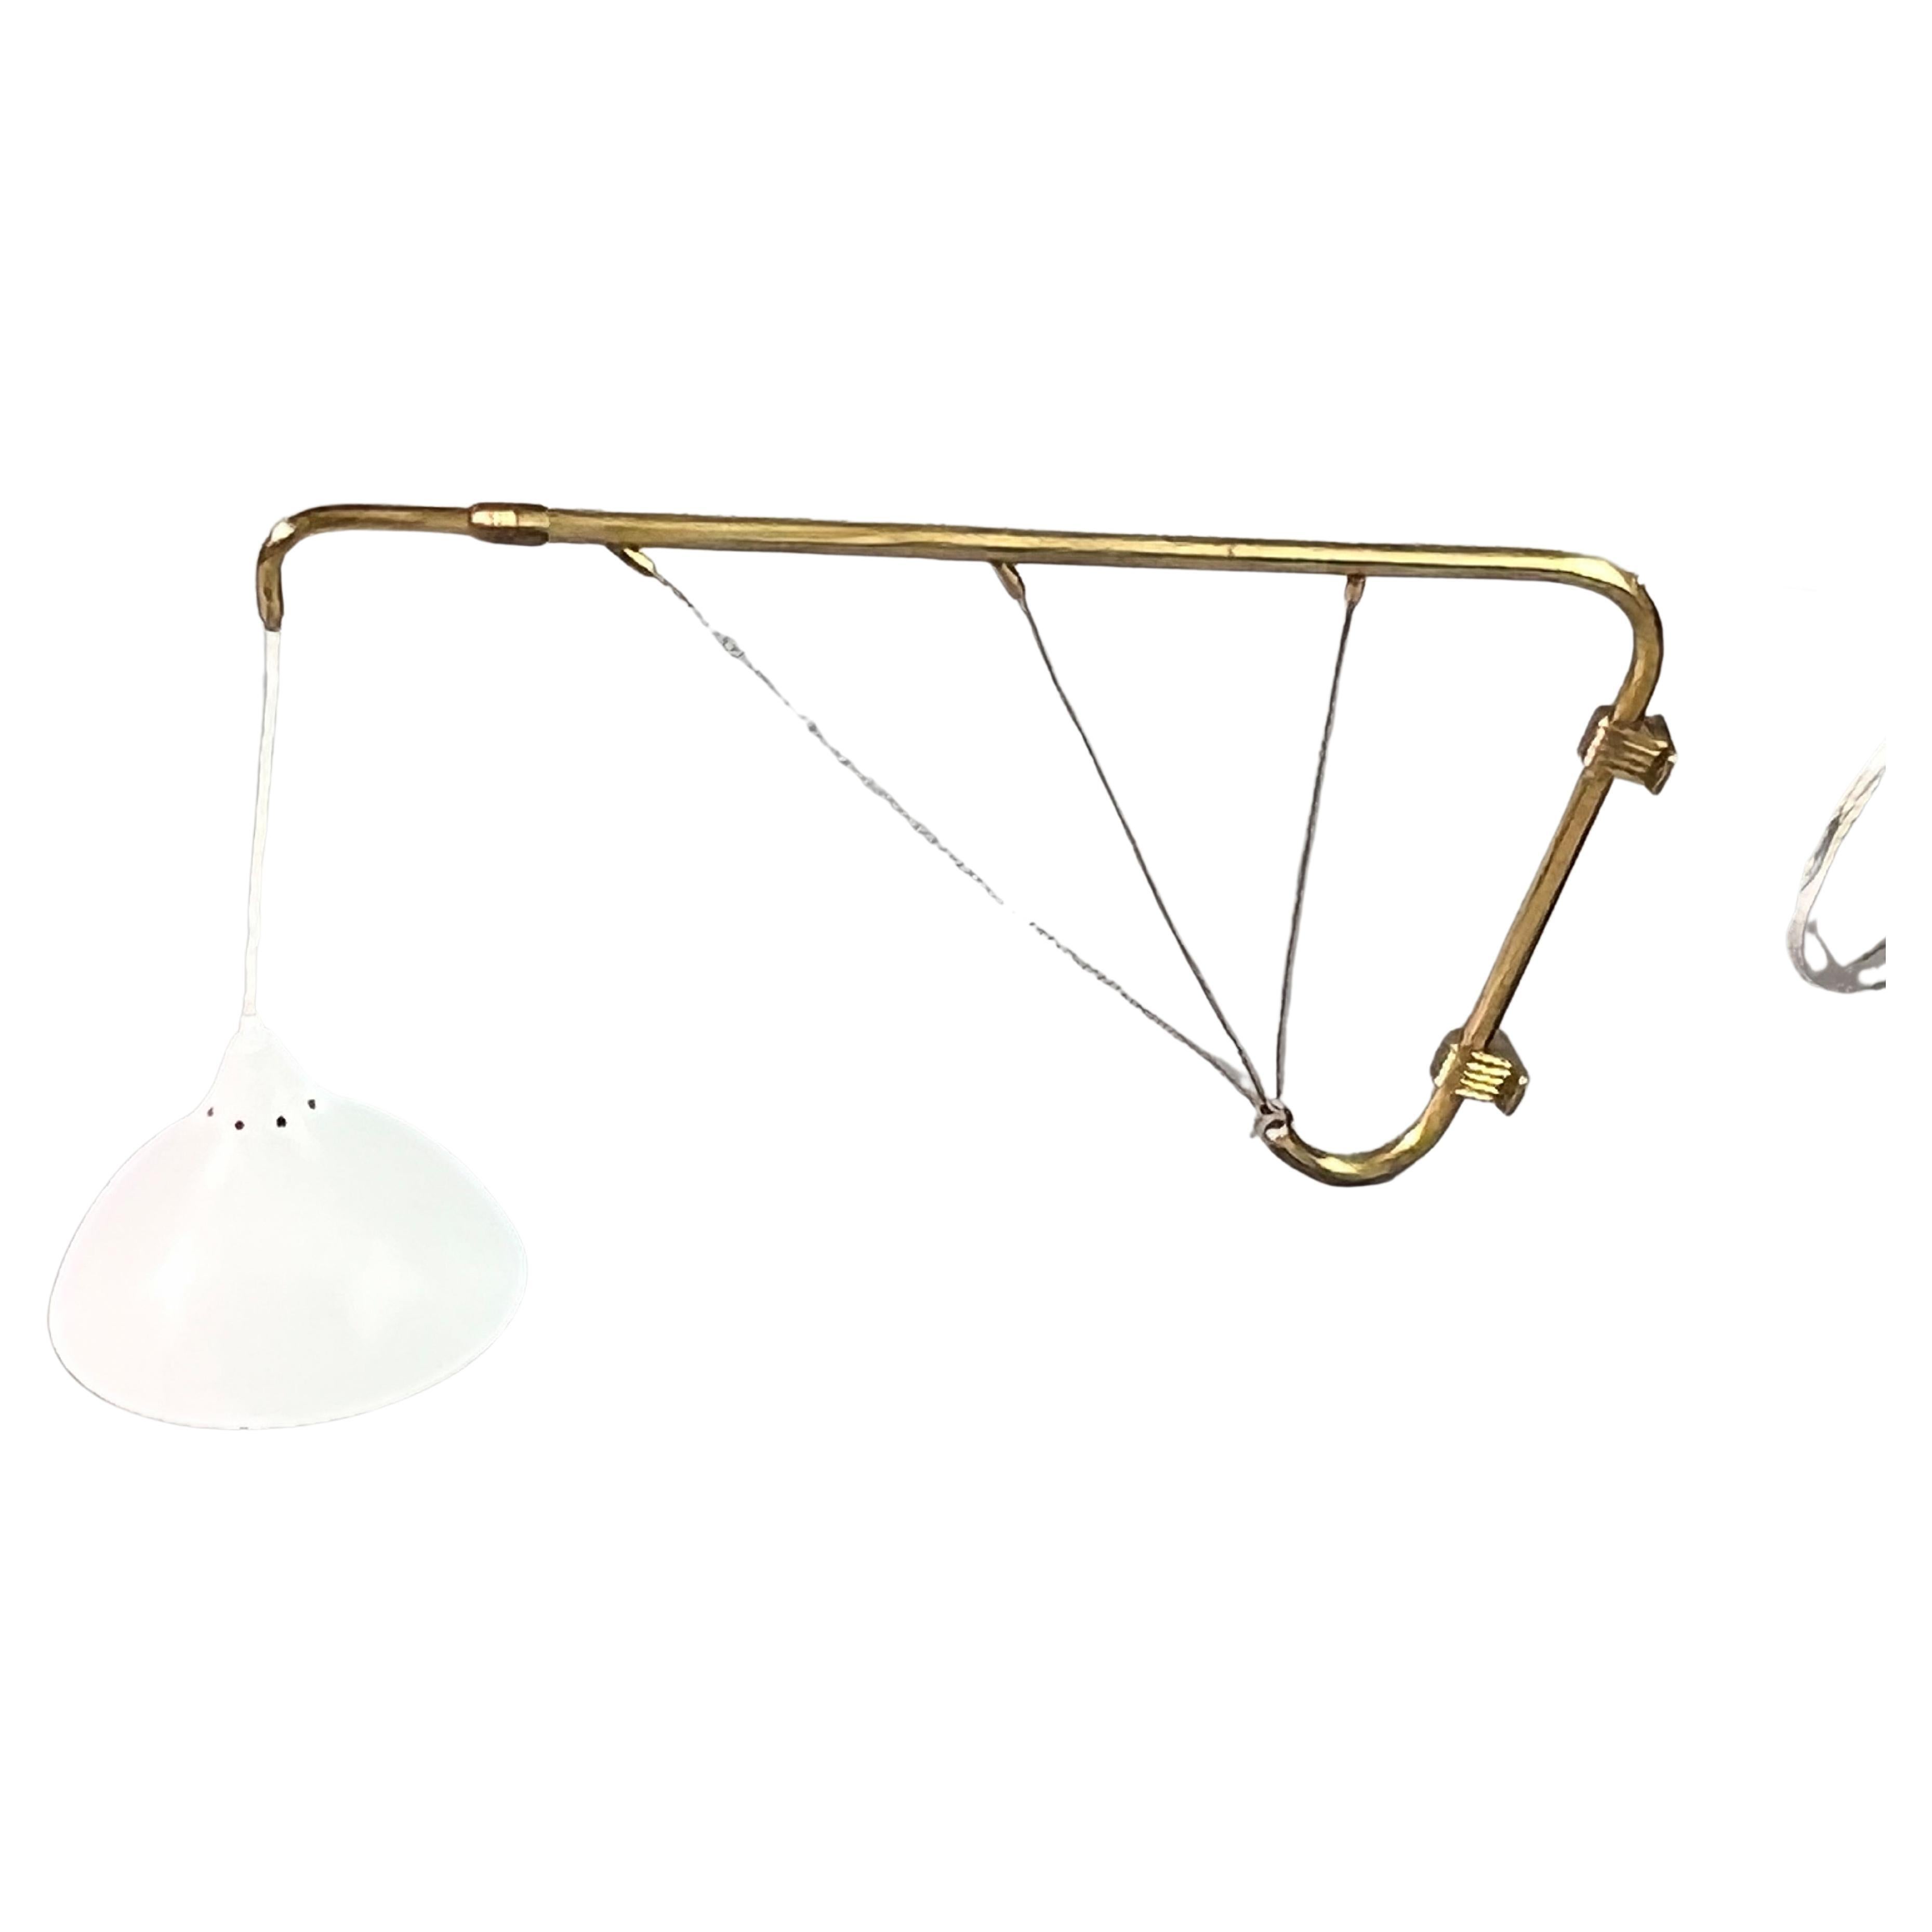 Brass Extendable Wall Lamp, Attributed Arredoluce, Italy, 1950